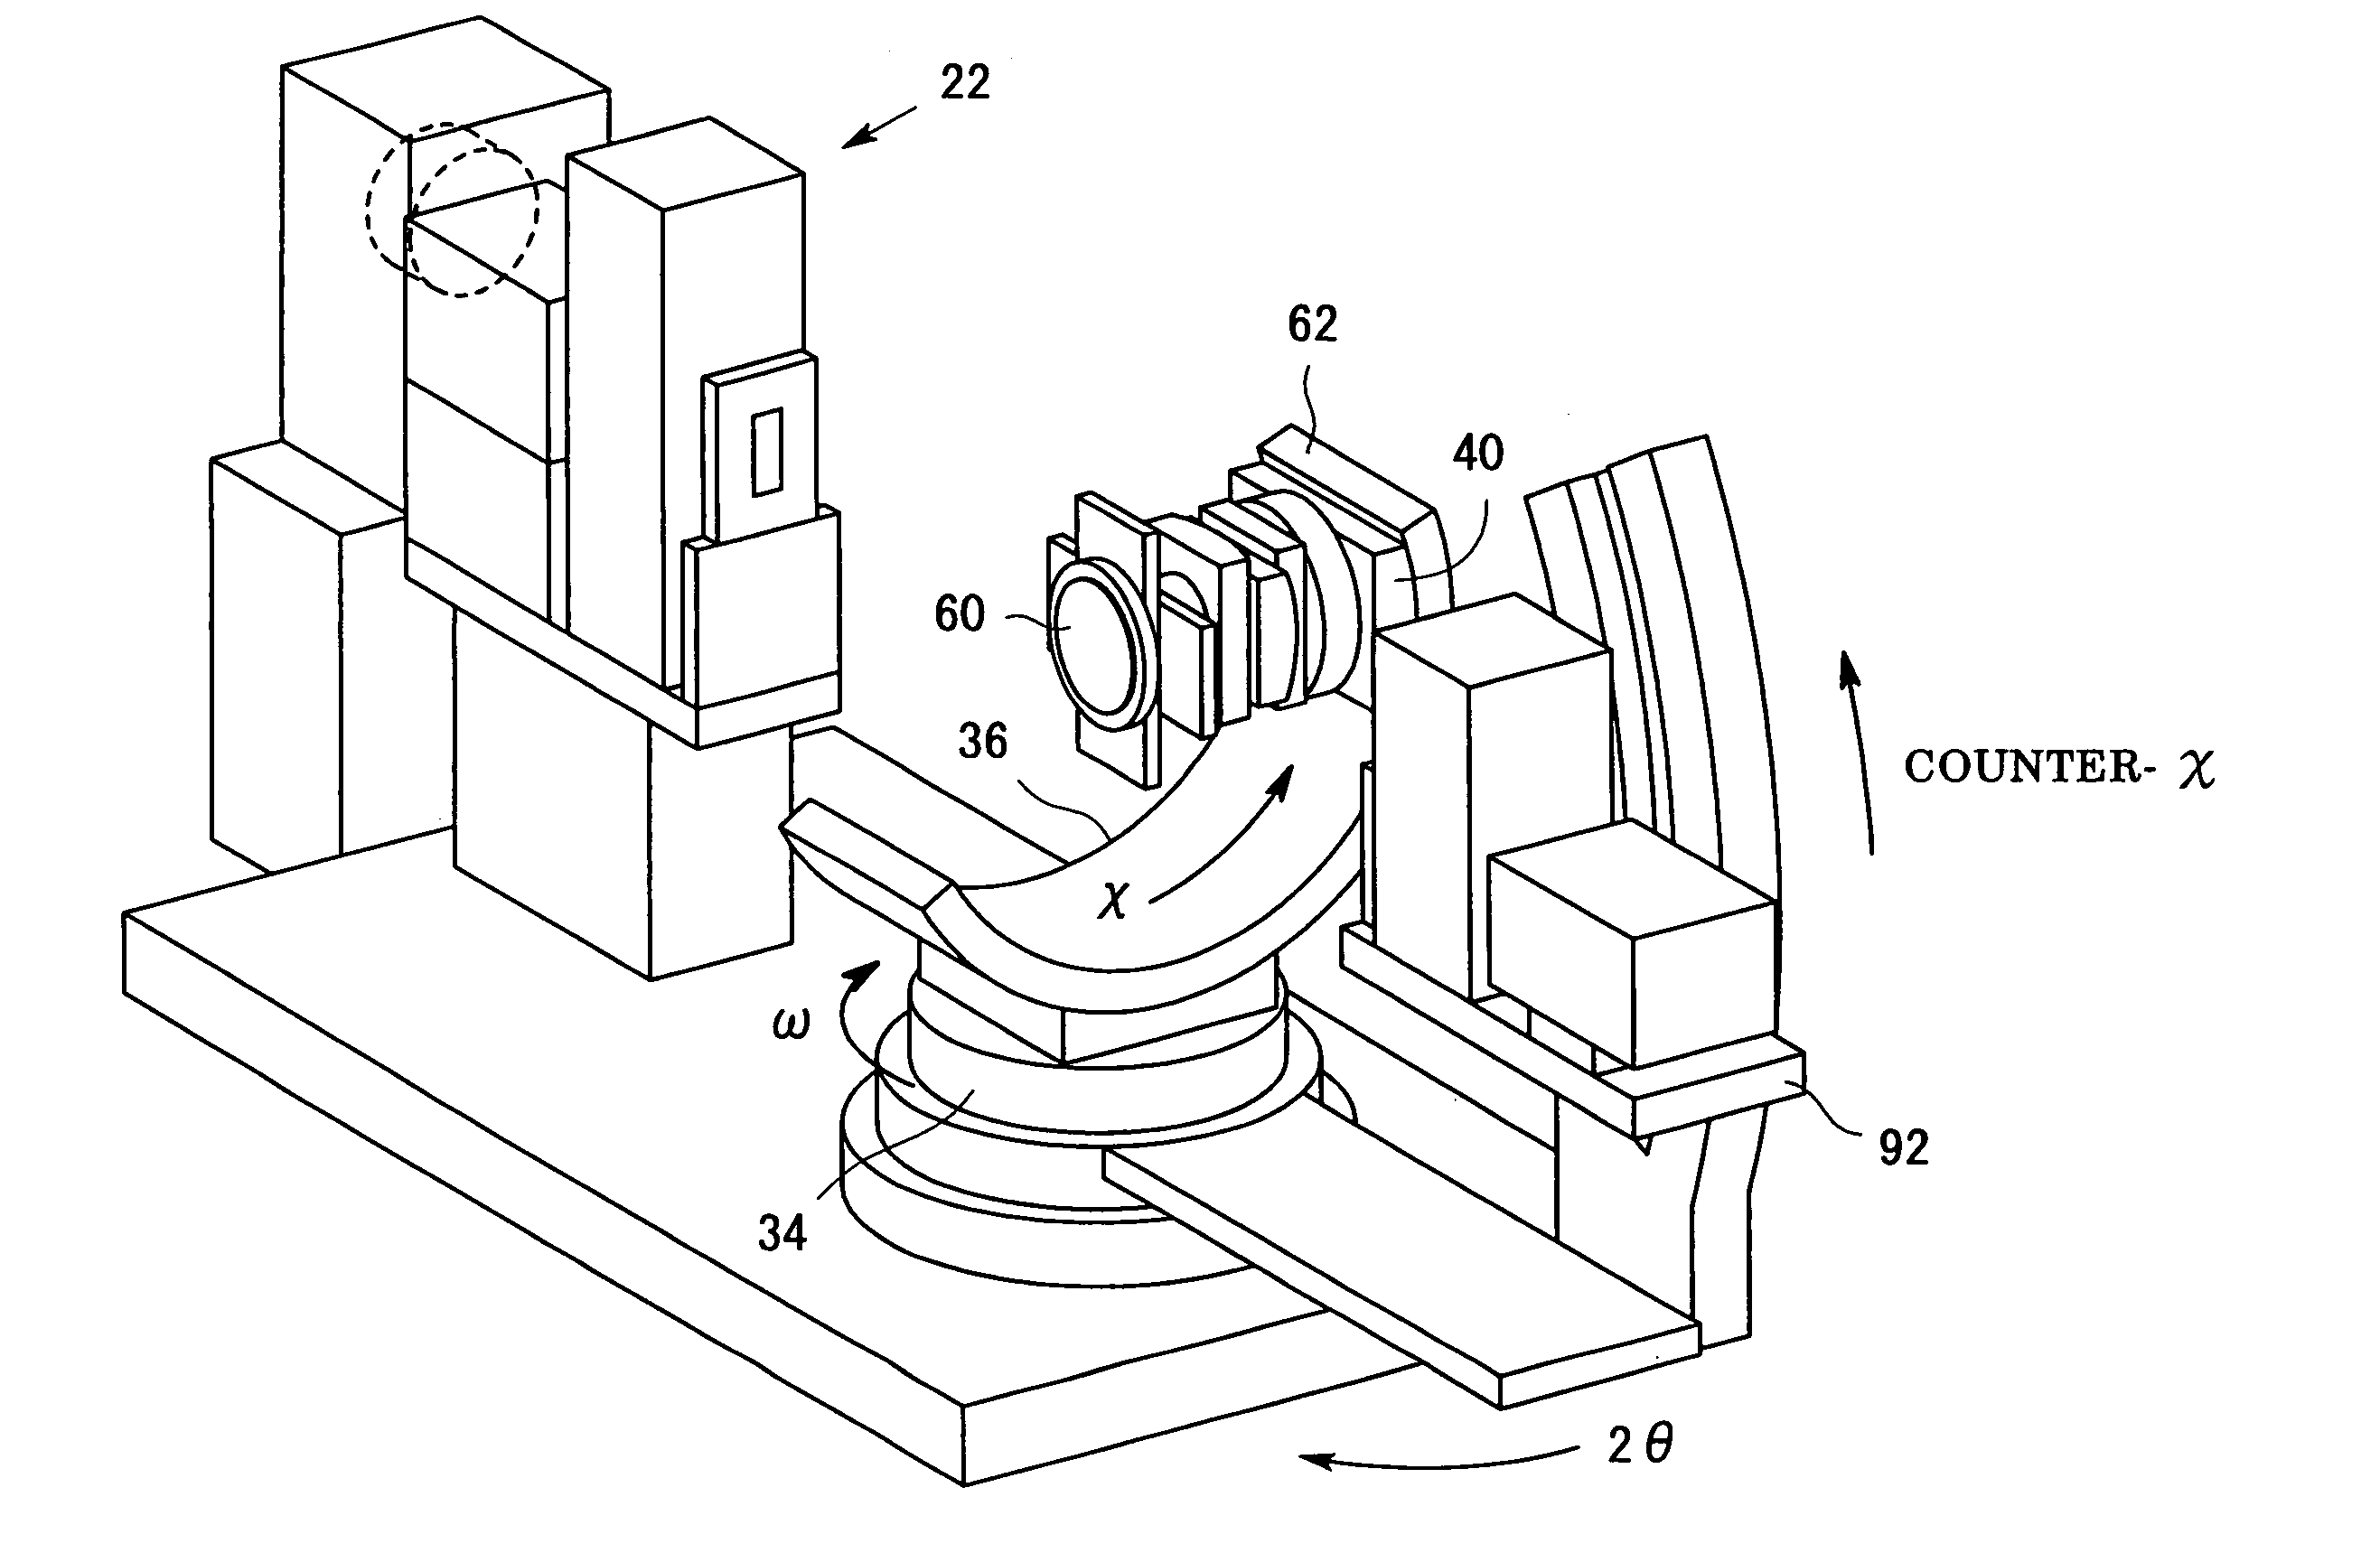 X-ray diffraction apparatus